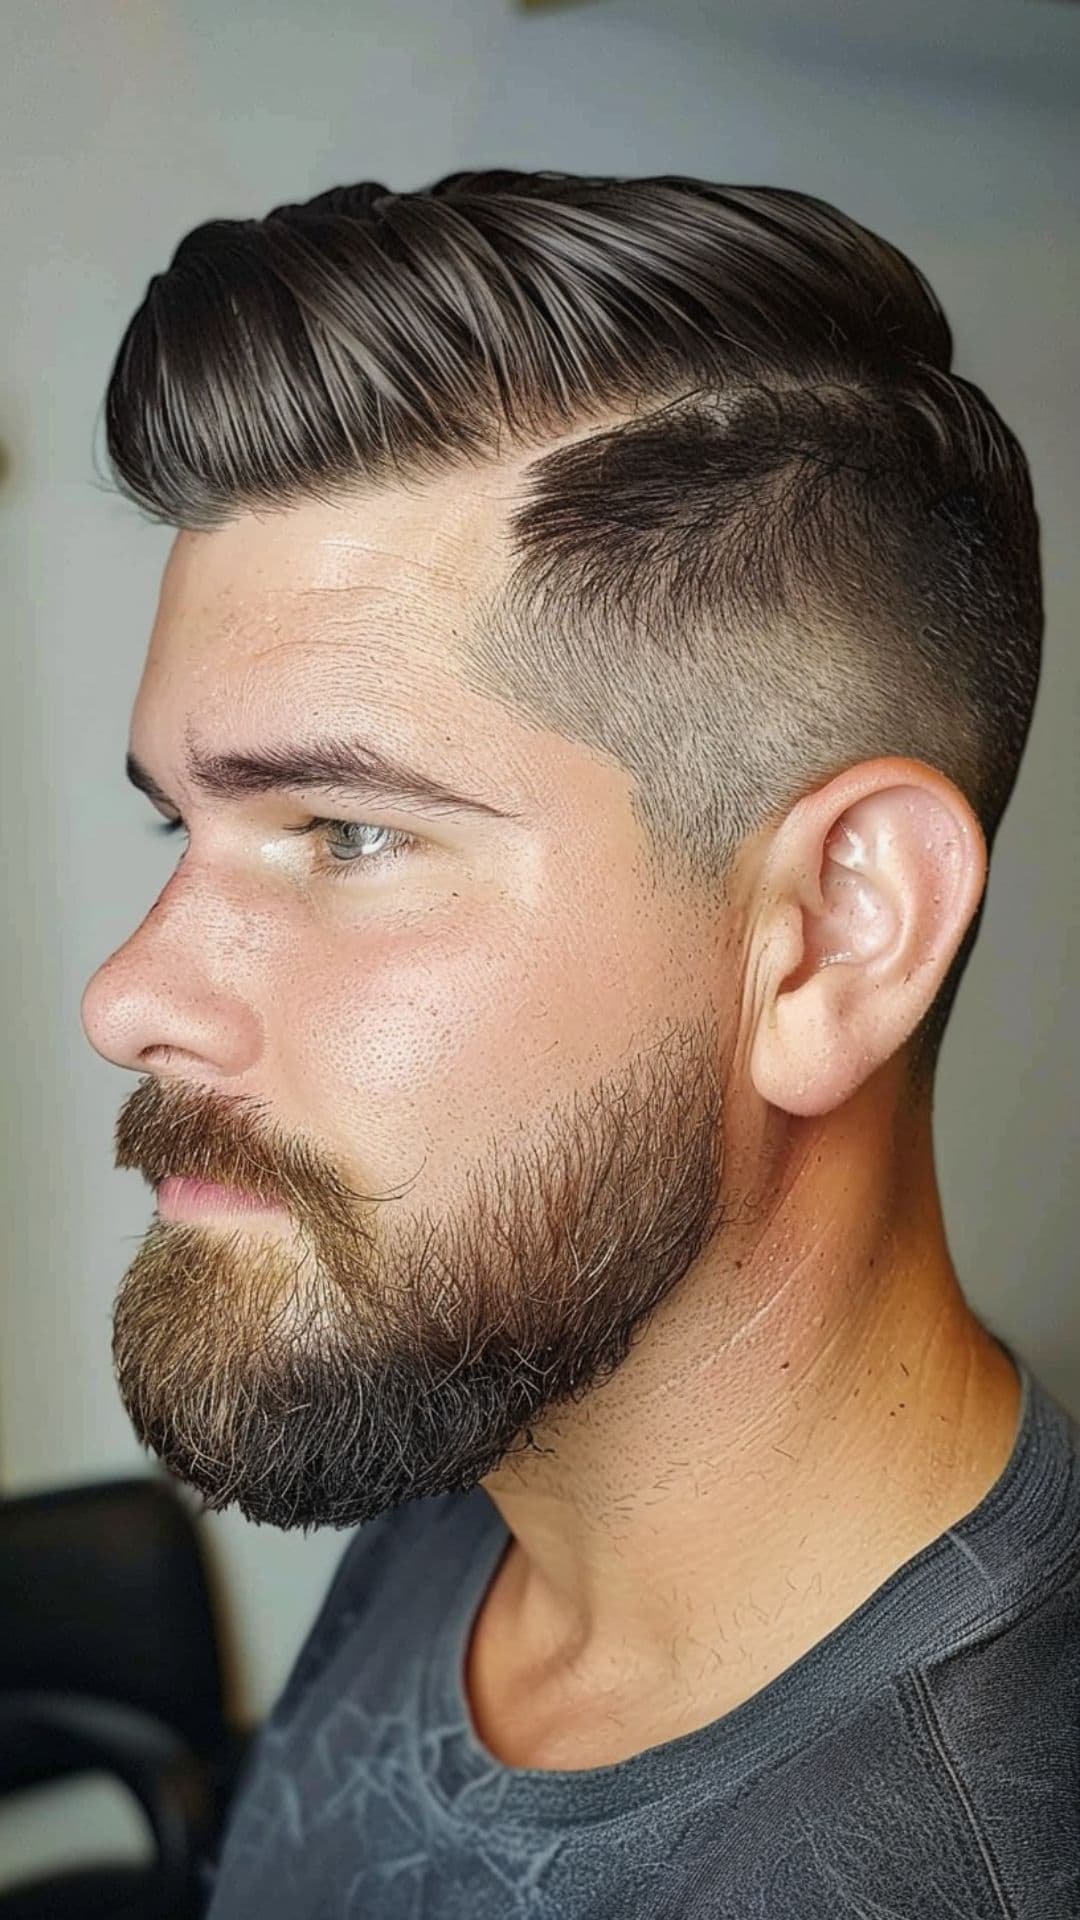 A man modelling a comb over haircut with beard.